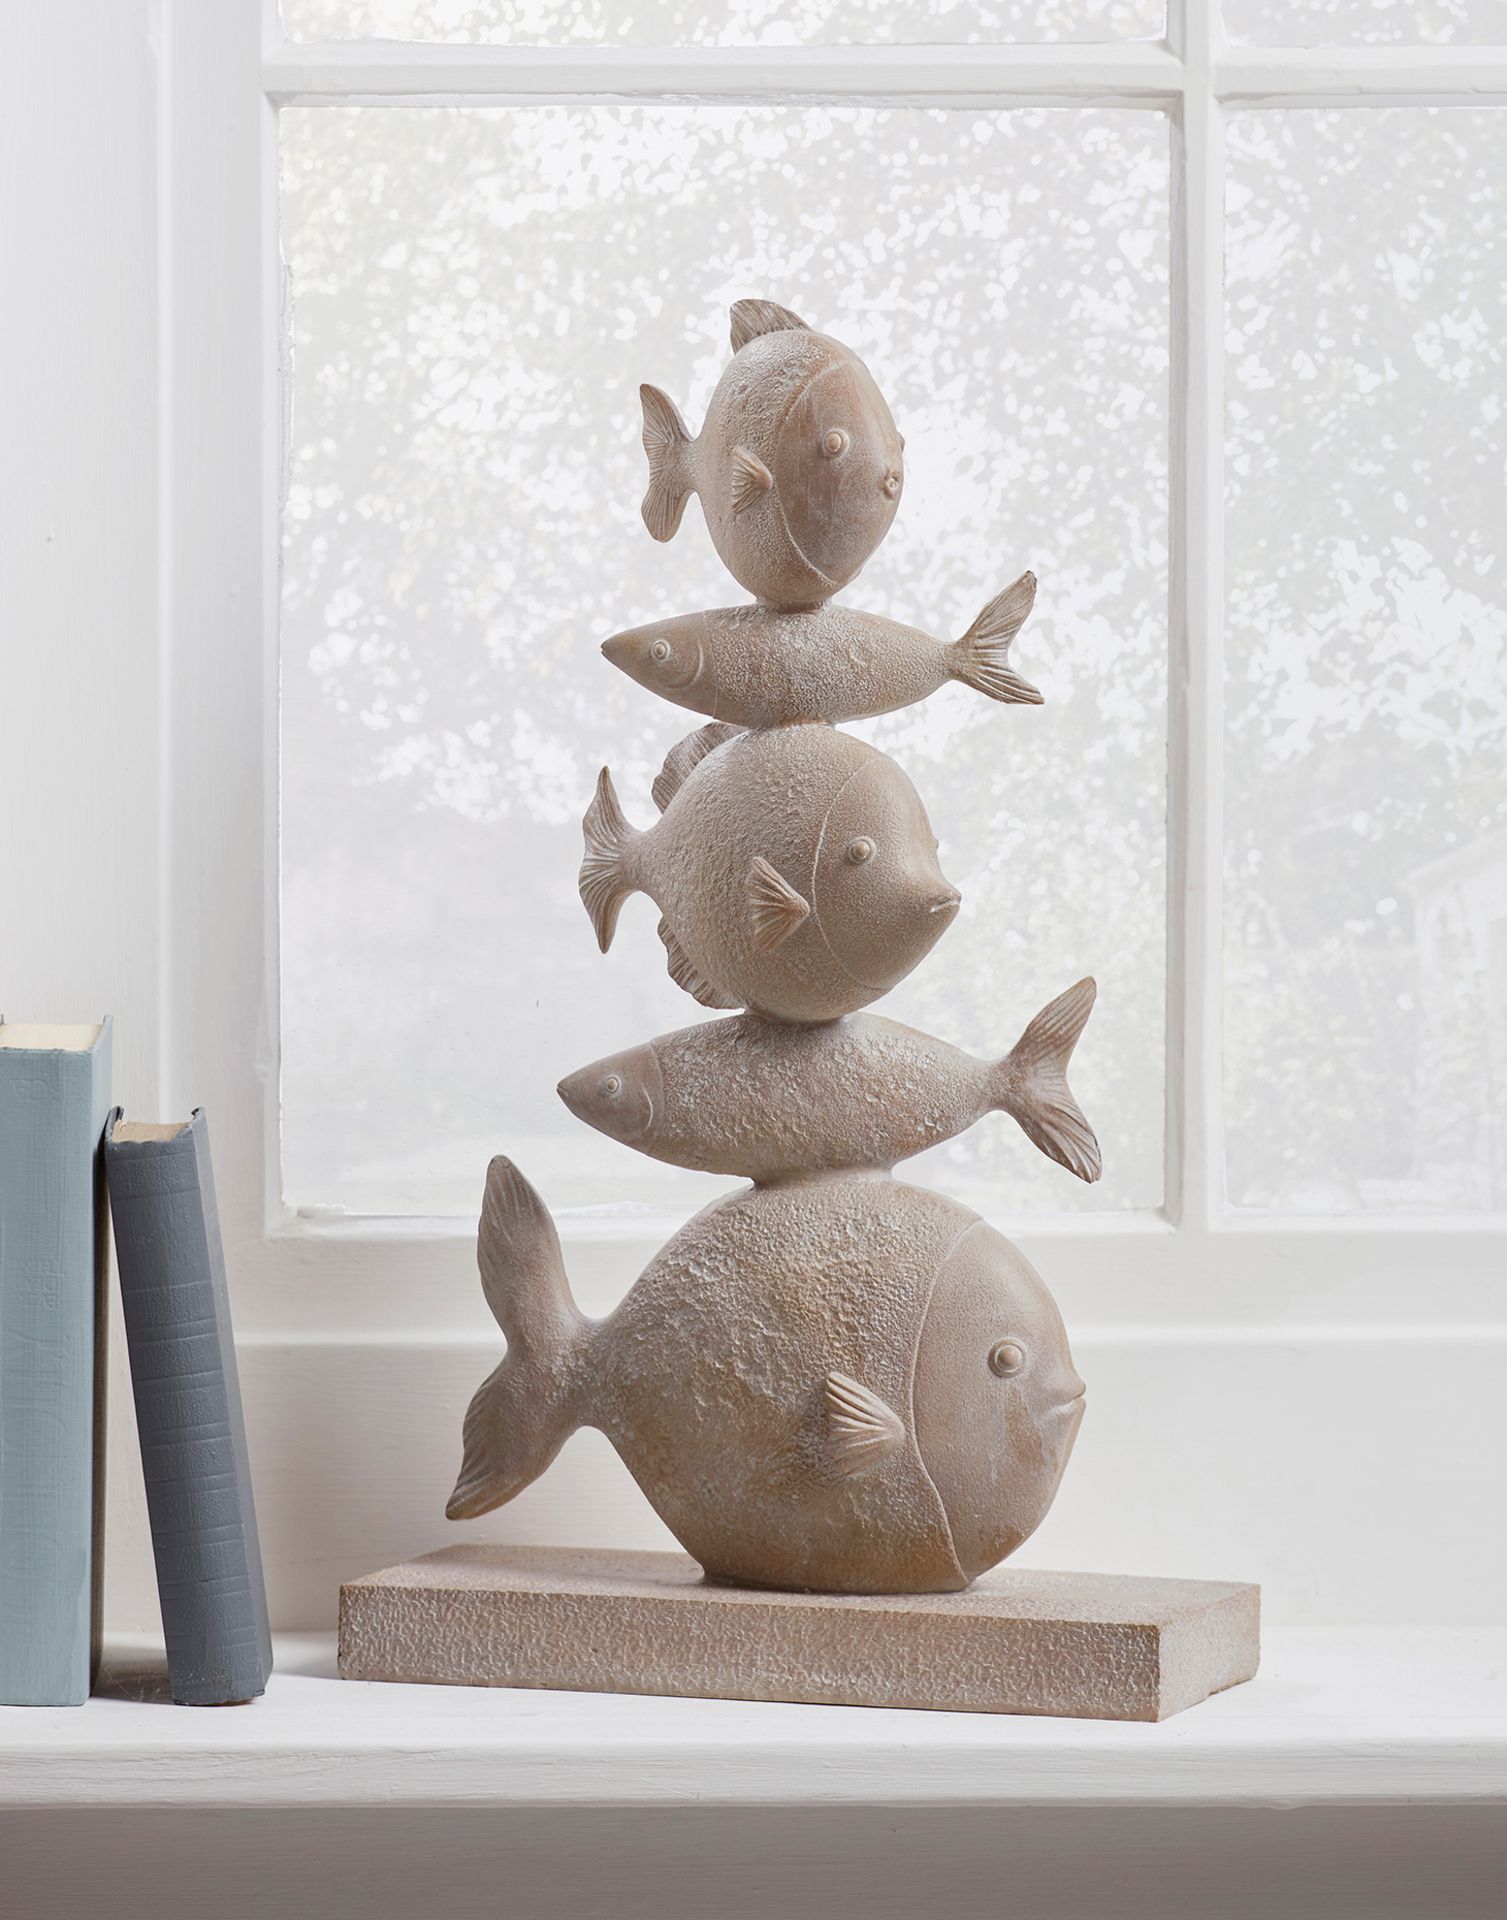 Cox & Cox Fish Totem Ornament. RRP £50.00. The brown washed finish of this lively fish ornament